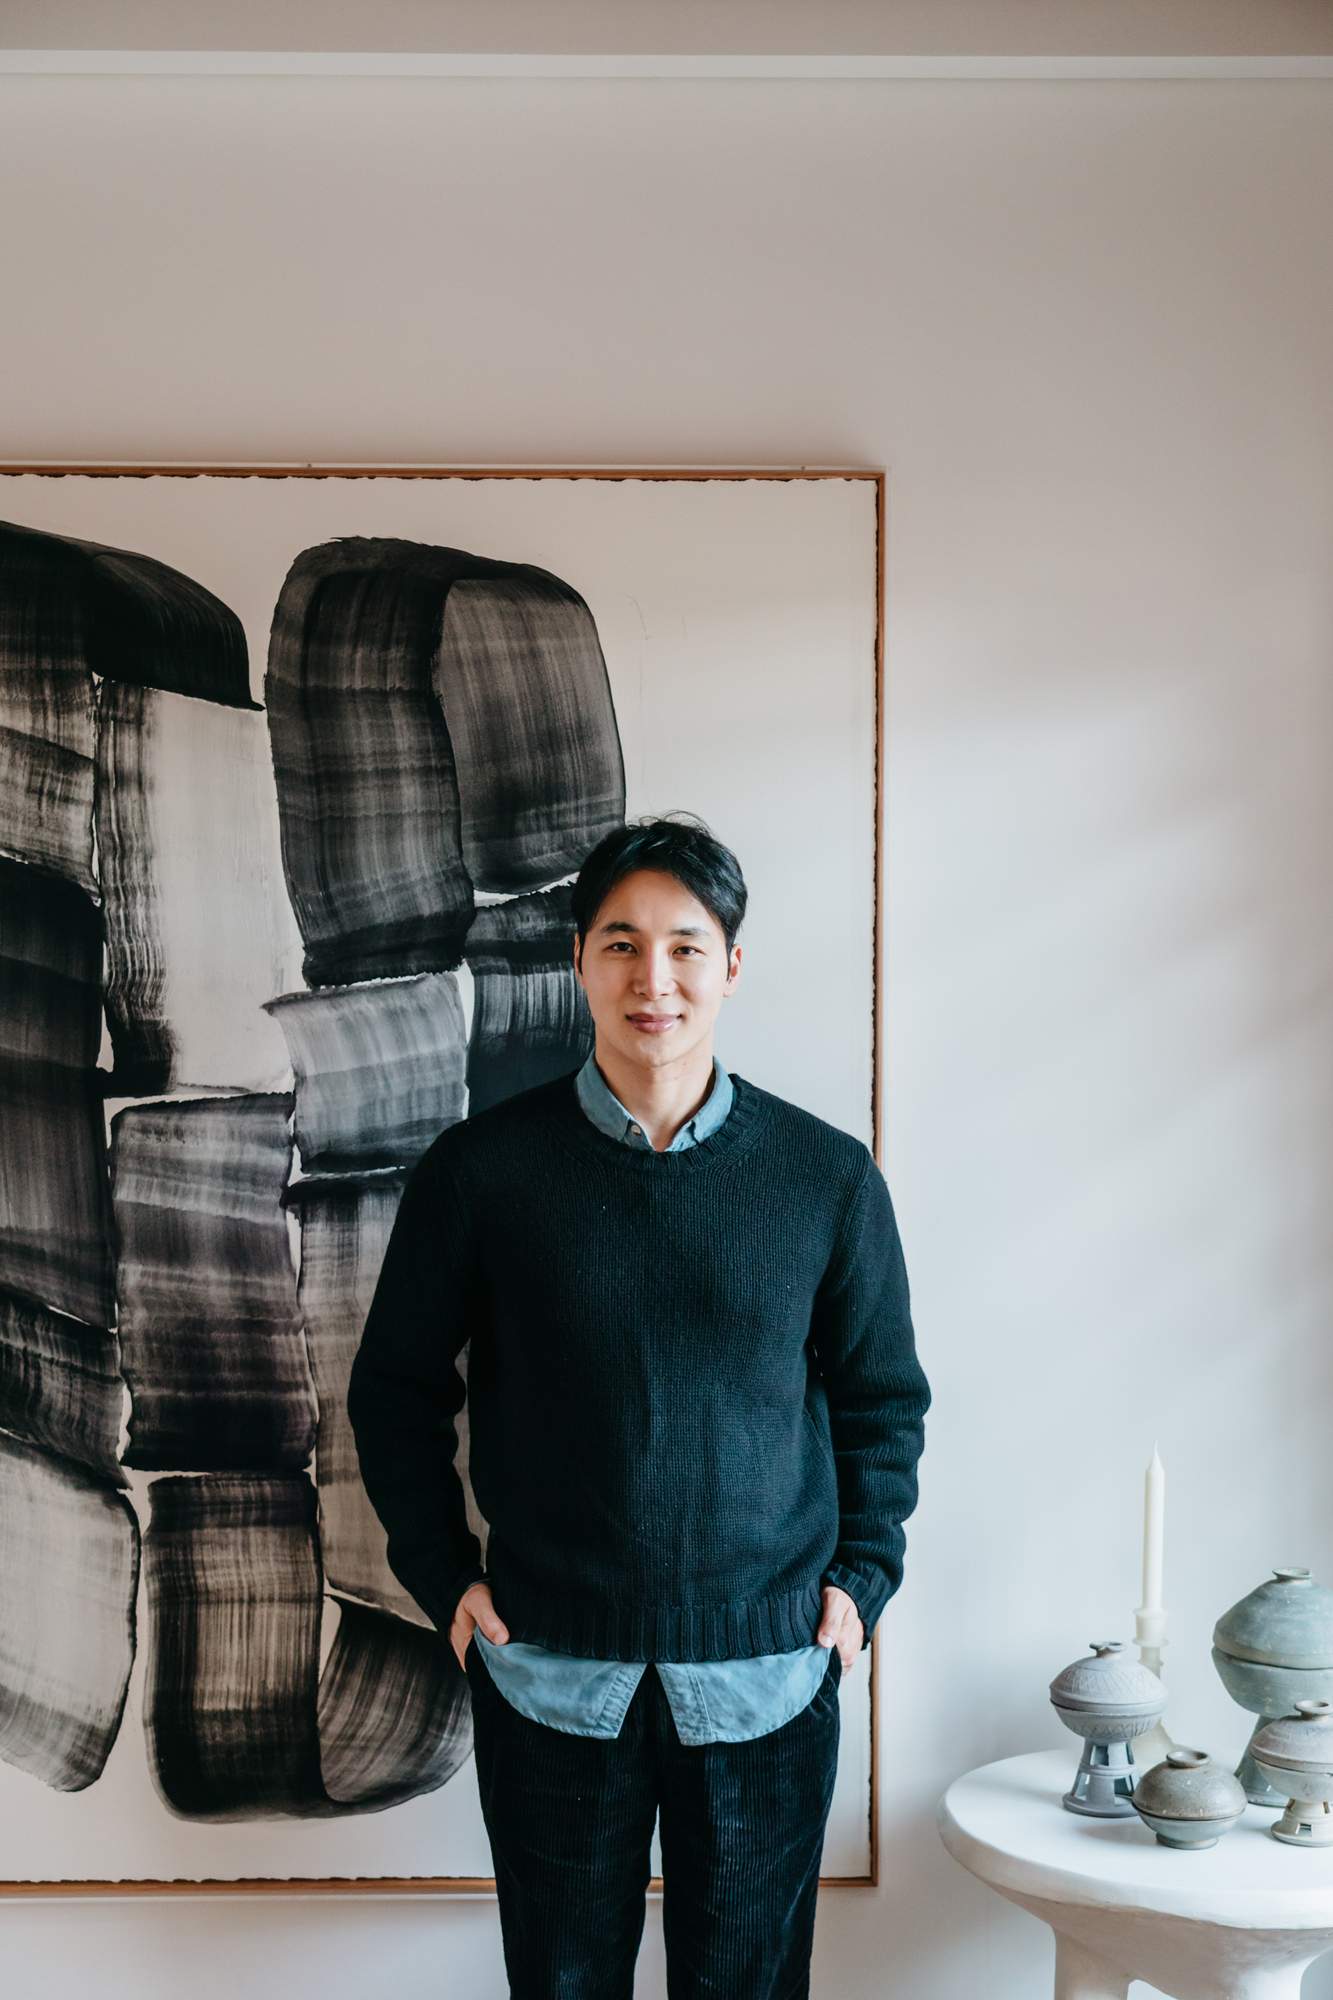 Designer Teo Yang Carries Korean Traditions into the 21st Century